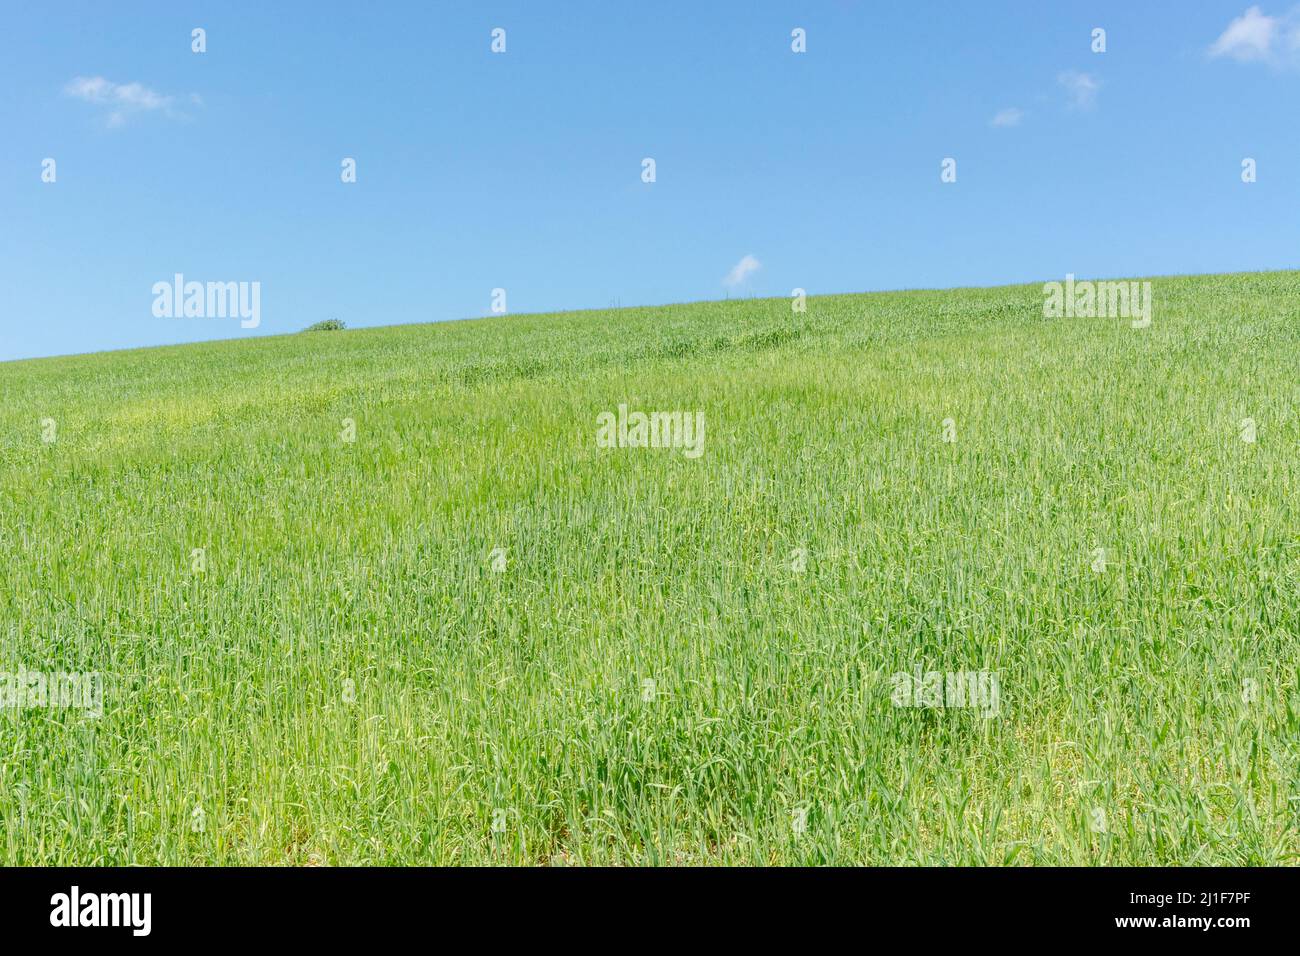 Green fields of England concept. Blue skies over field of growing cereal crop - Cornwall, UK. Metaphor food security / growing food, British farming. Stock Photo